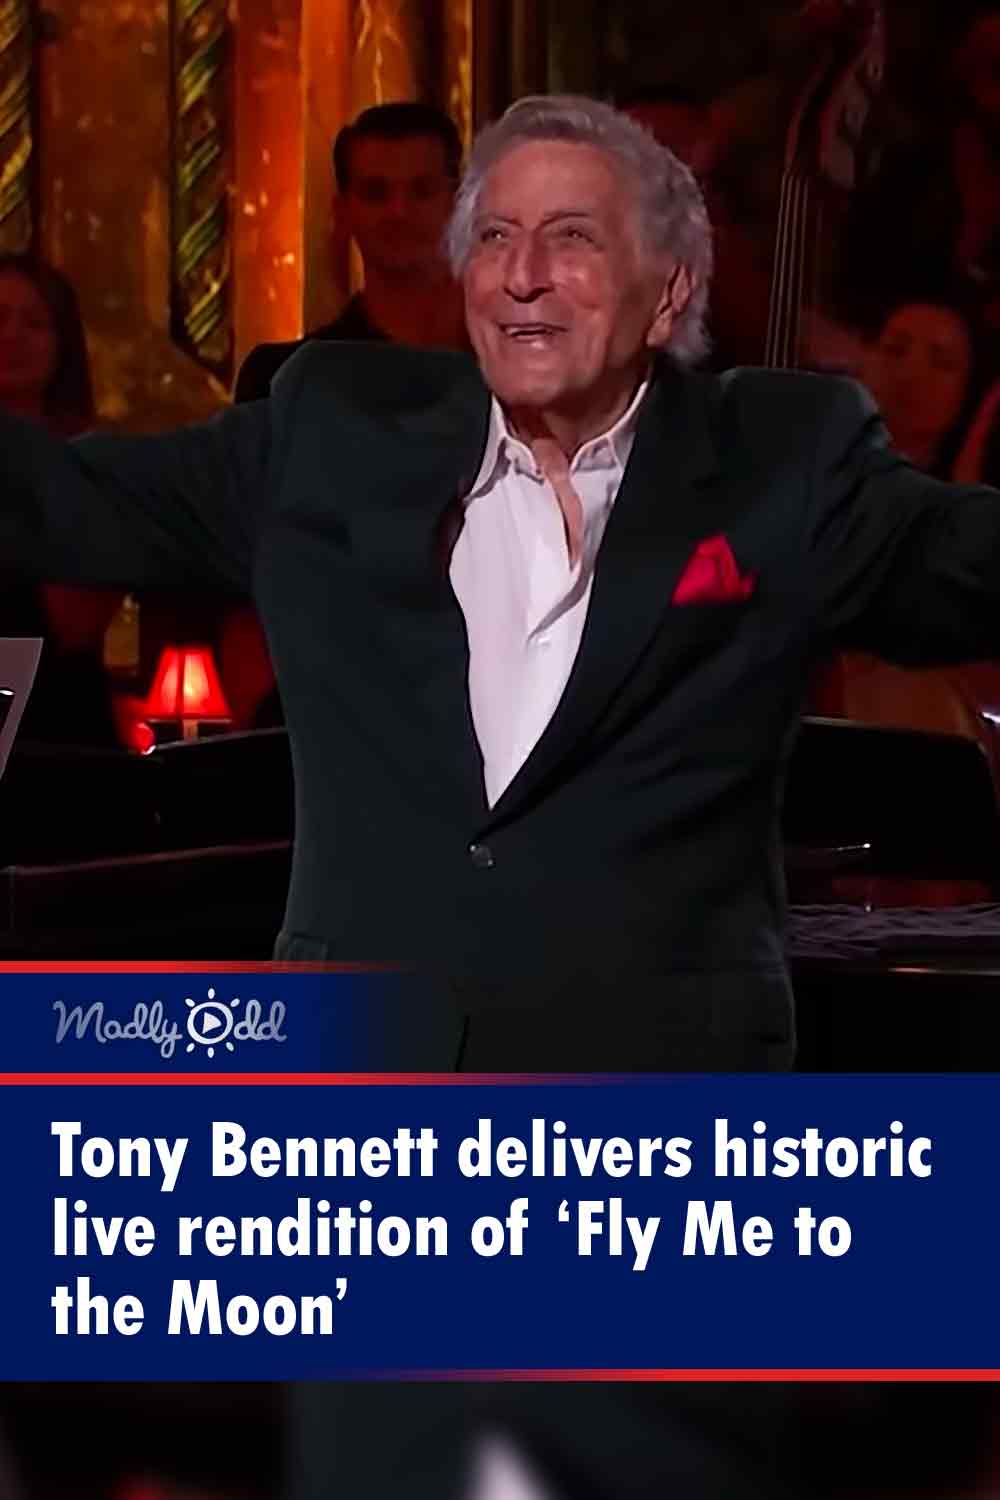 Tony Bennett delivers historic live rendition of ‘Fly Me to the Moon’